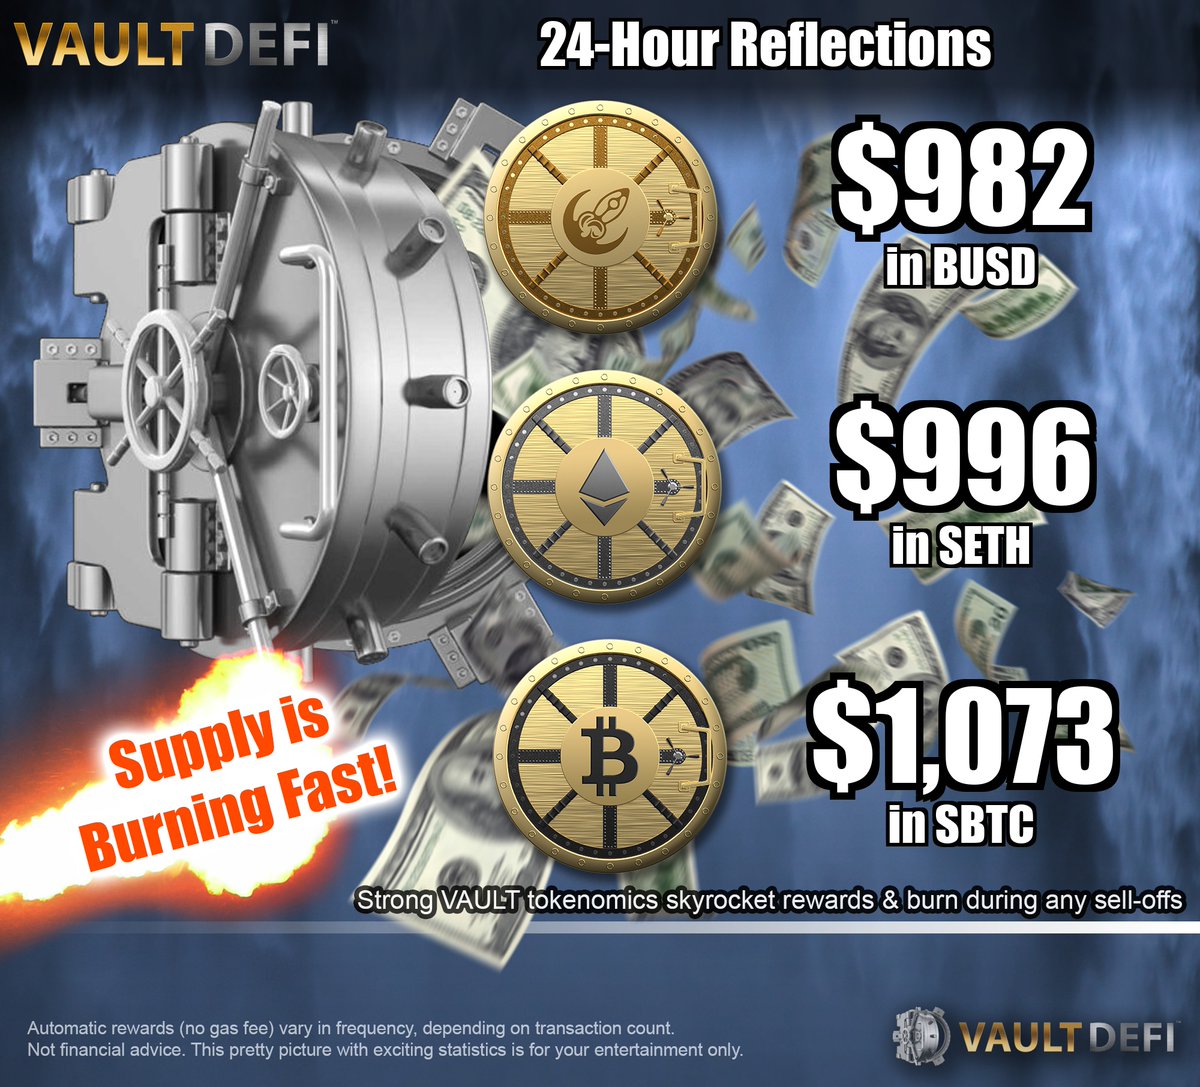 📊24-Hour @VaultDeFi Reflection Report📈: $982 in BUSD from #SafeVault, $996 in #SurgeETH from #EthVault, $1073 in #SurgeBTC from the new Vault token. 💰💰💰NOTE: Some holders have chosen #SurgeADA or other rewards not yet shown here. Big reflections are #NoTricksJustTreats 👻🍬